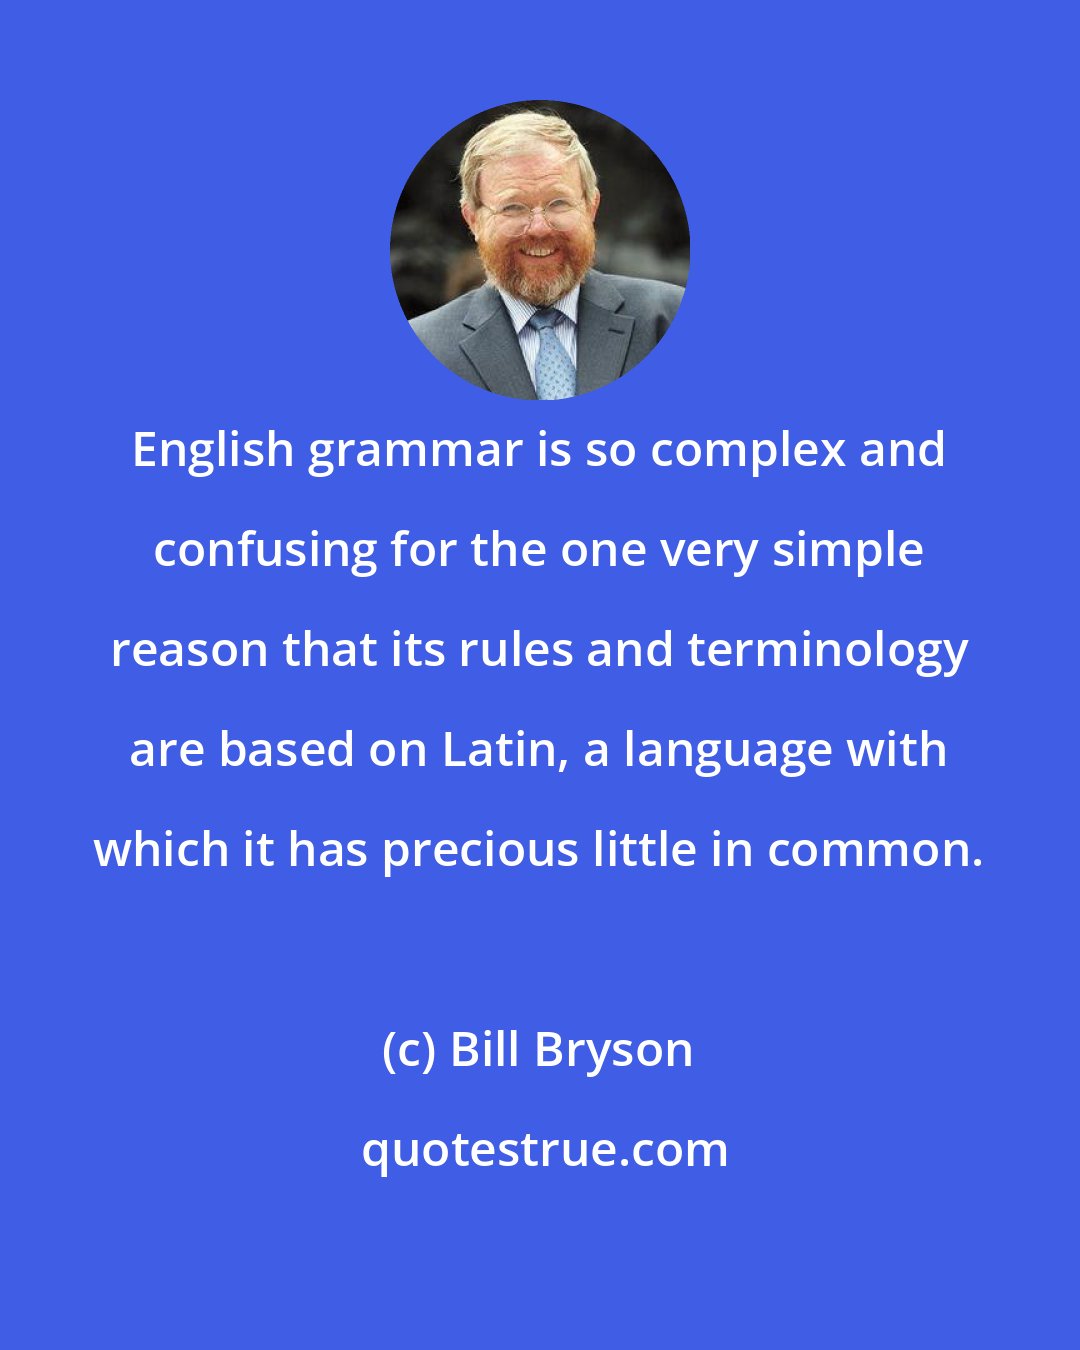 Bill Bryson: English grammar is so complex and confusing for the one very simple reason that its rules and terminology are based on Latin, a language with which it has precious little in common.